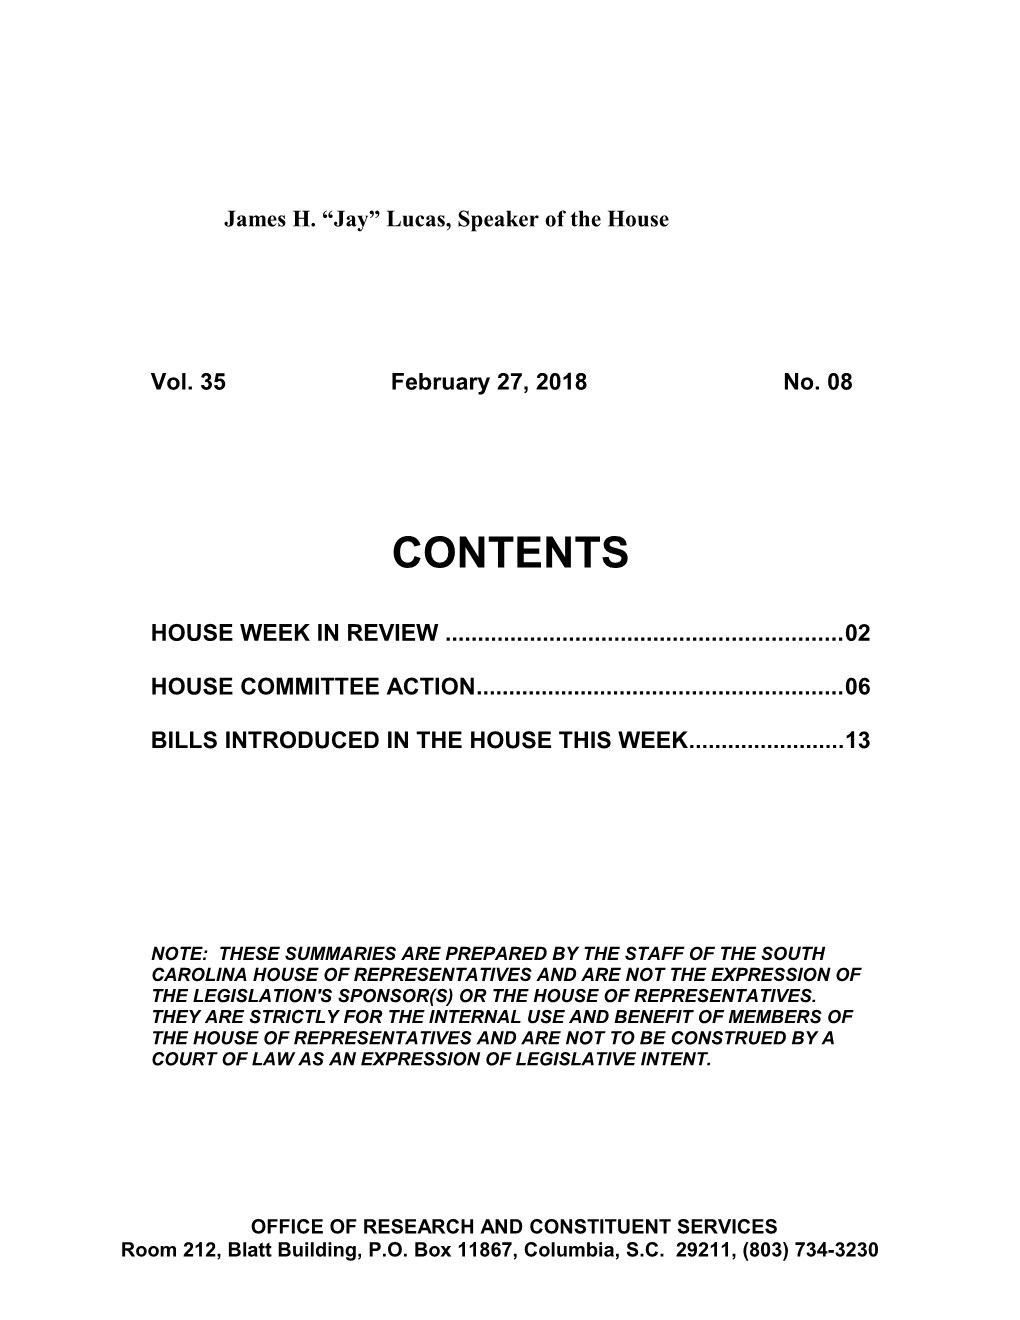 Bills Introduced in the House This Week 13